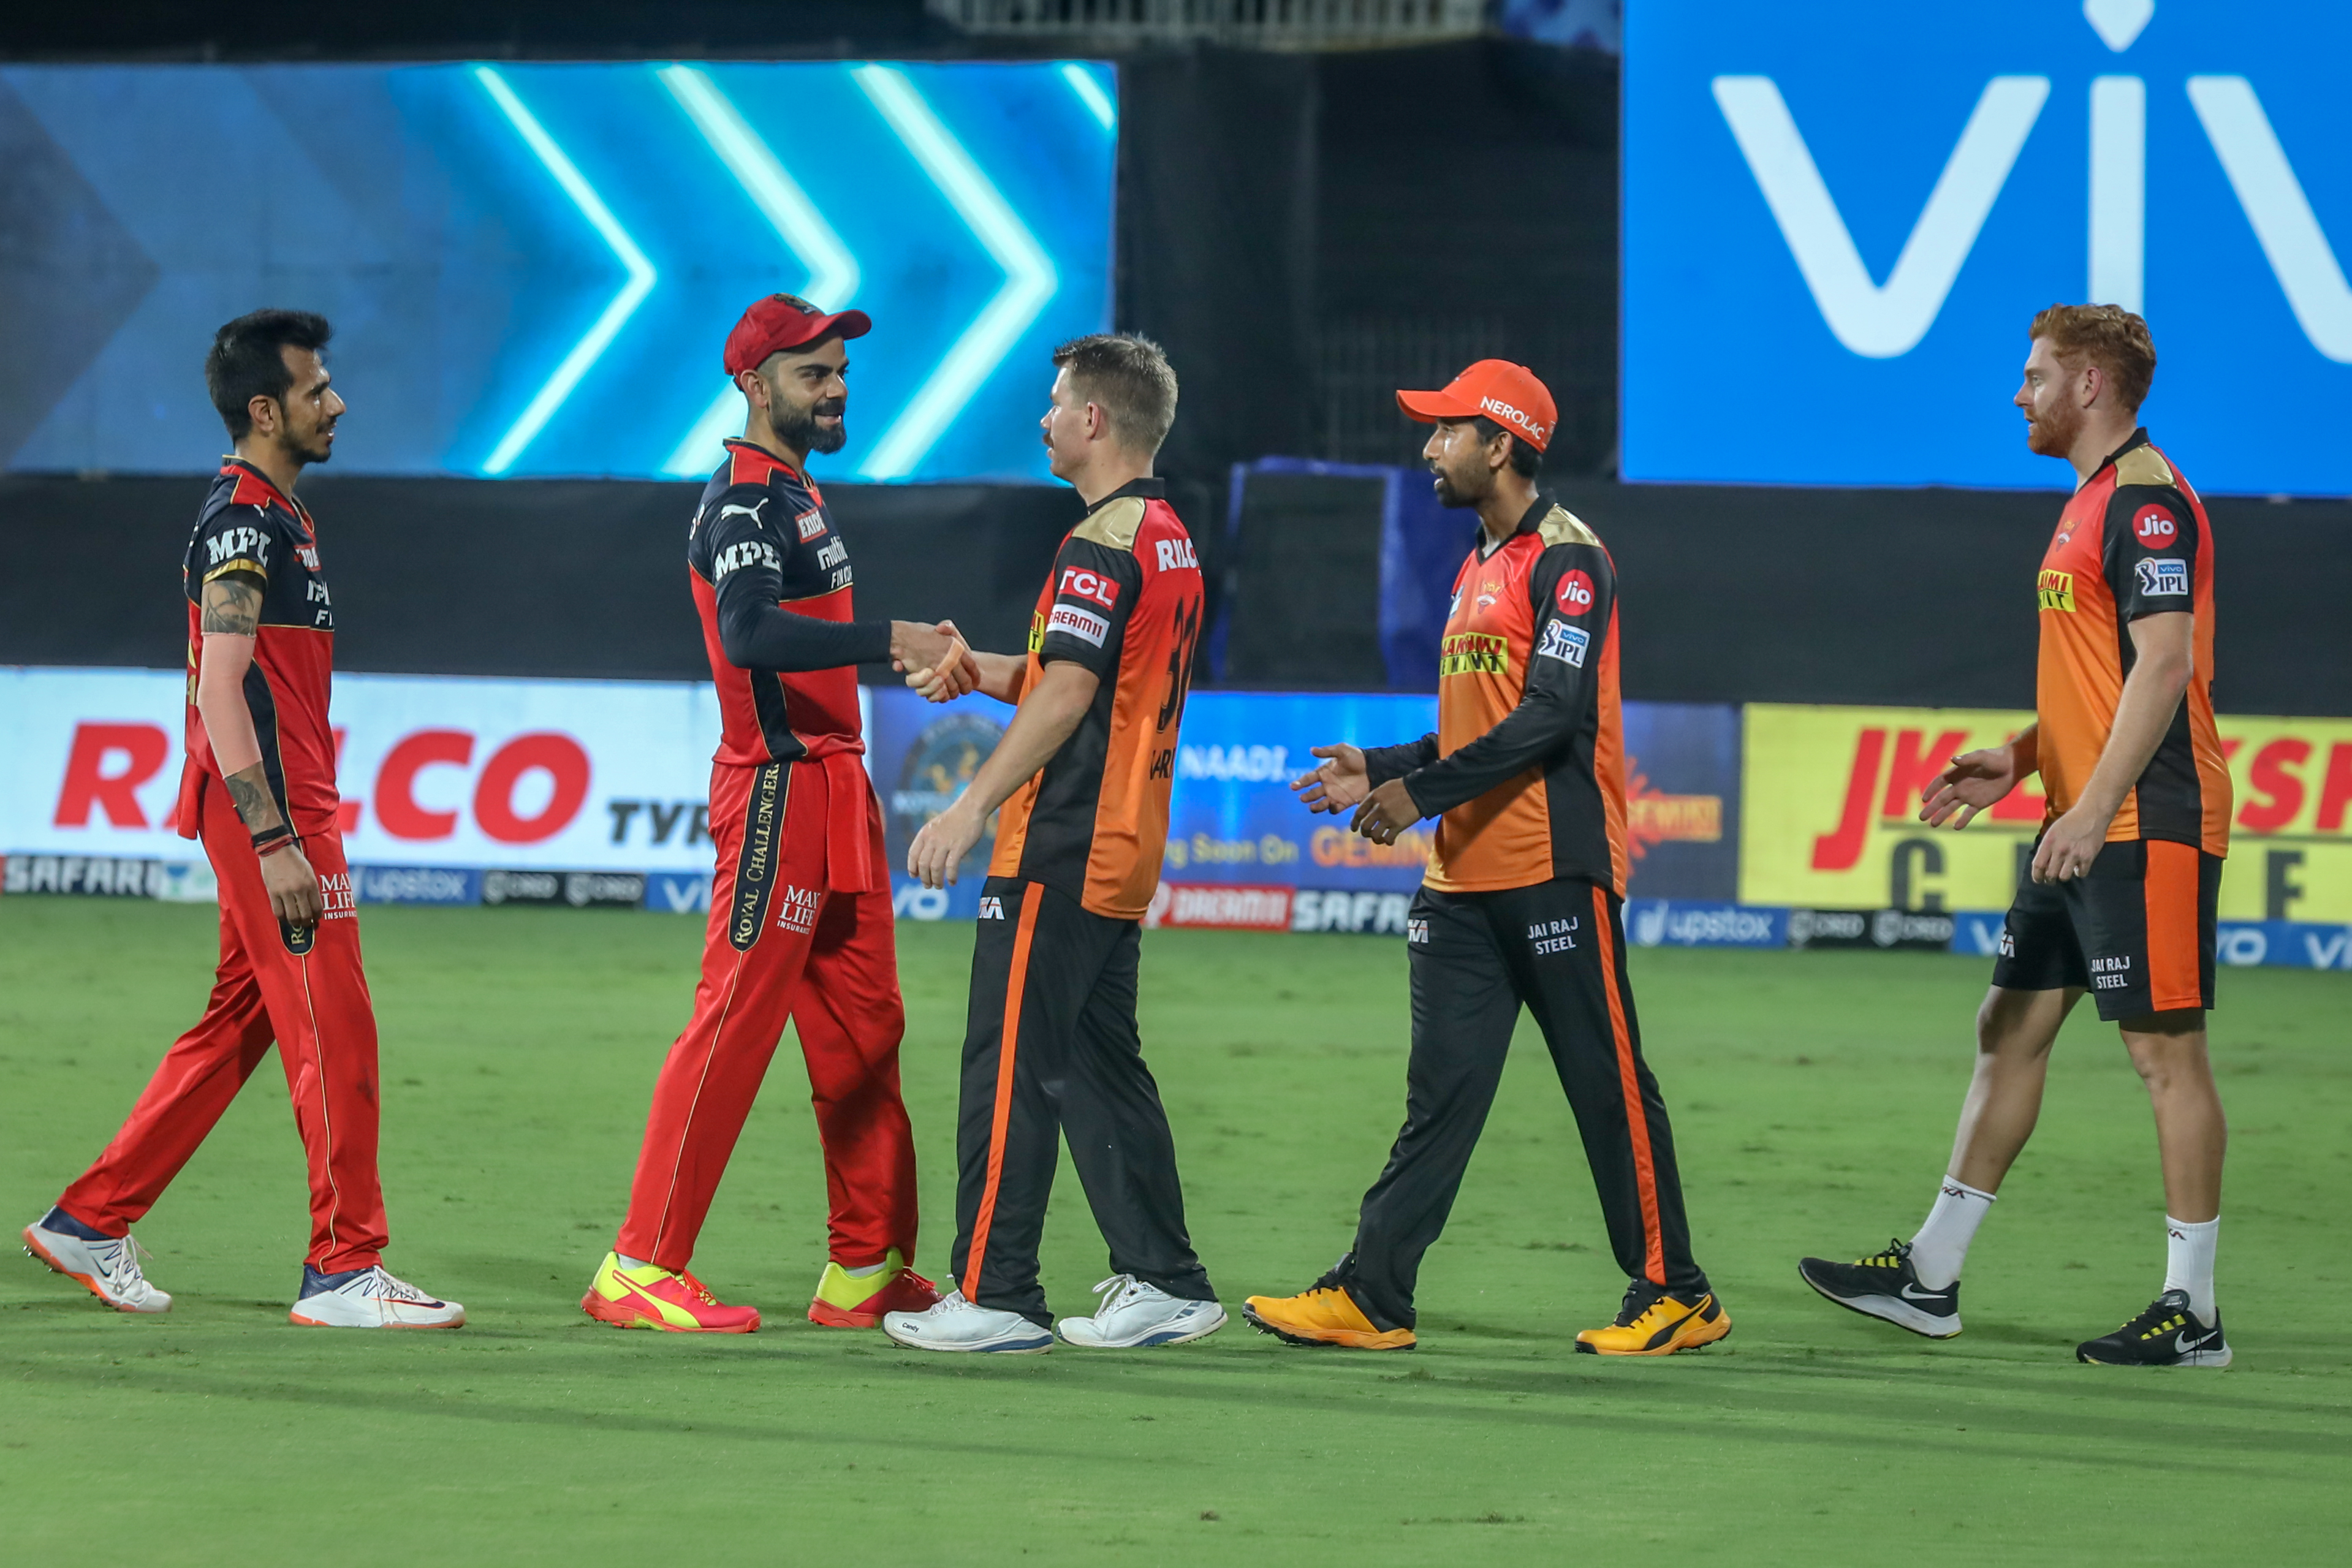 VVS Laxman is disappointed with SRH's loss to RCB | BCCI/IPL